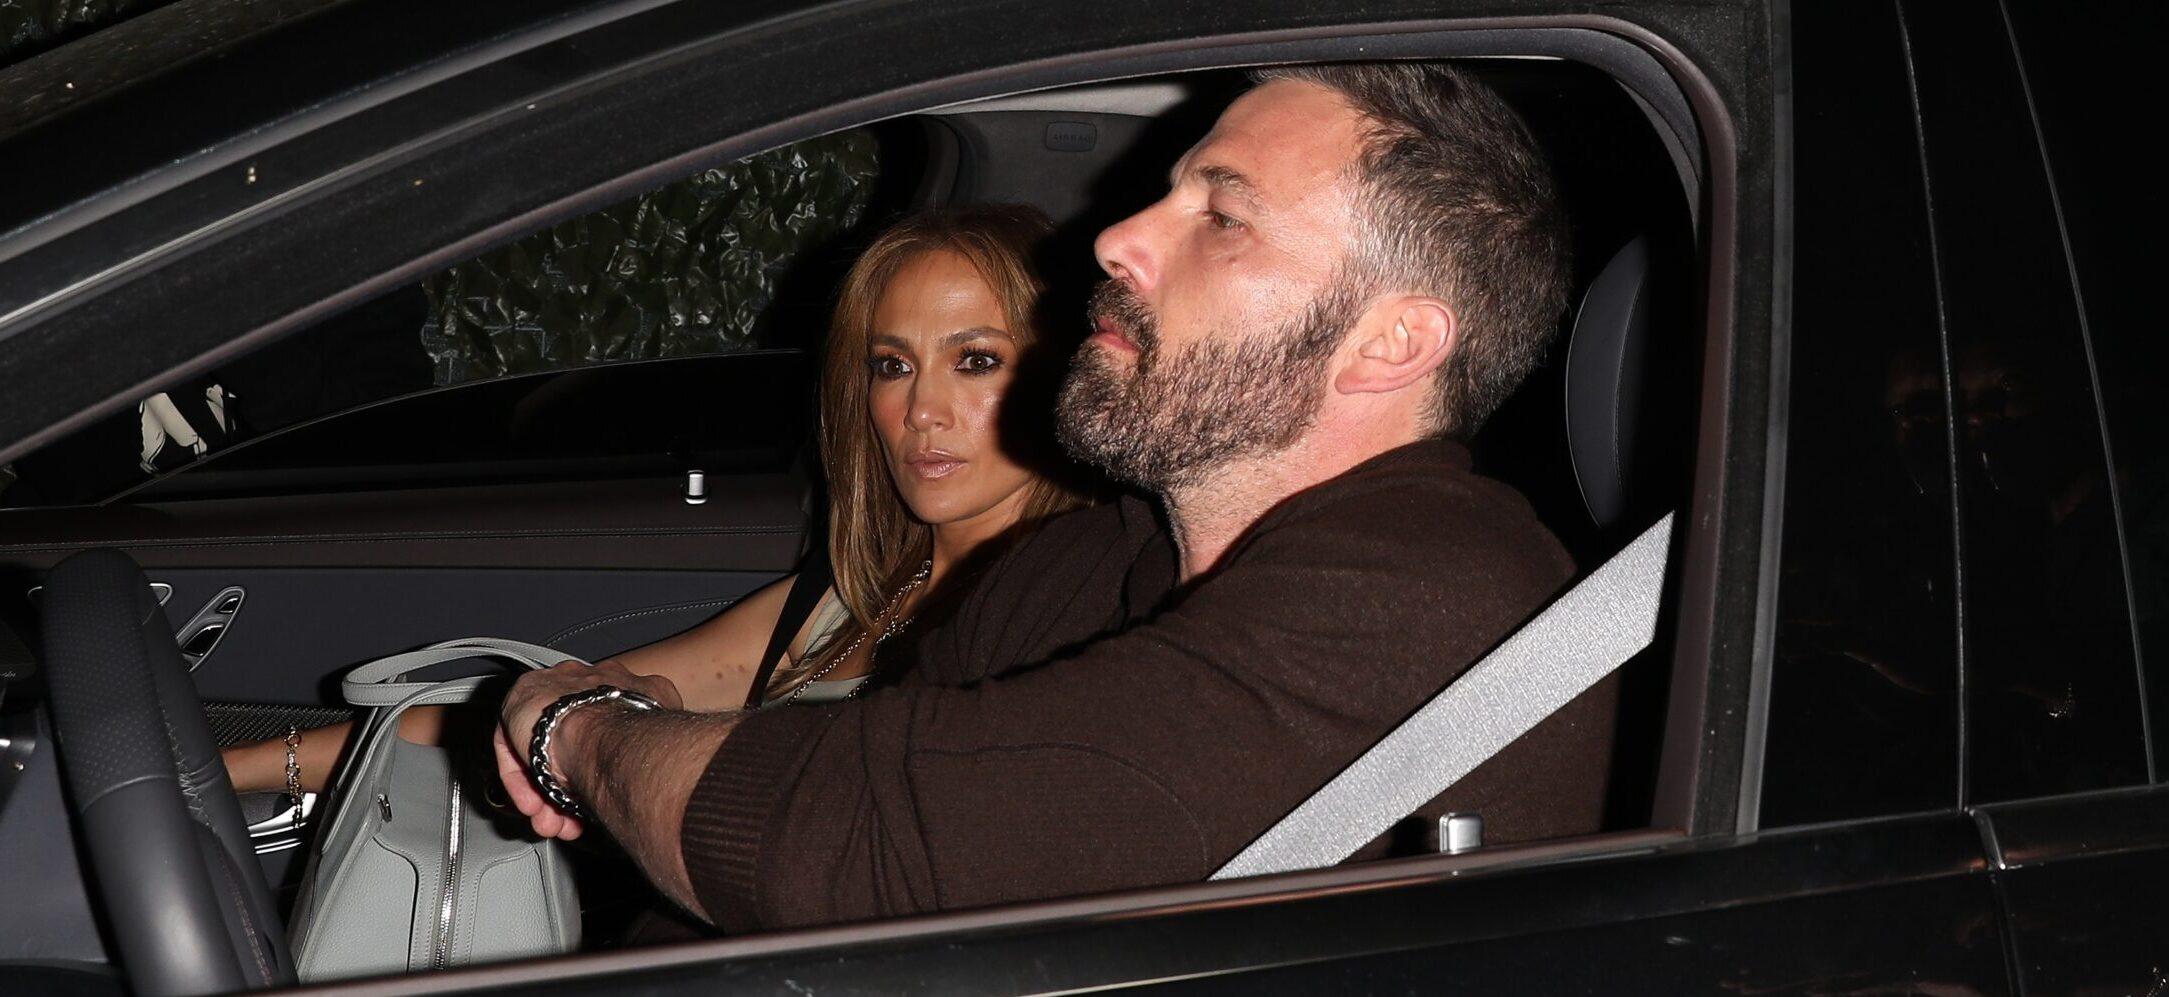 Jennifer Lopez Allegedly ‘Wasting’ No ‘Time Moving On’ From Ben Affleck Amid Divorce Rumors